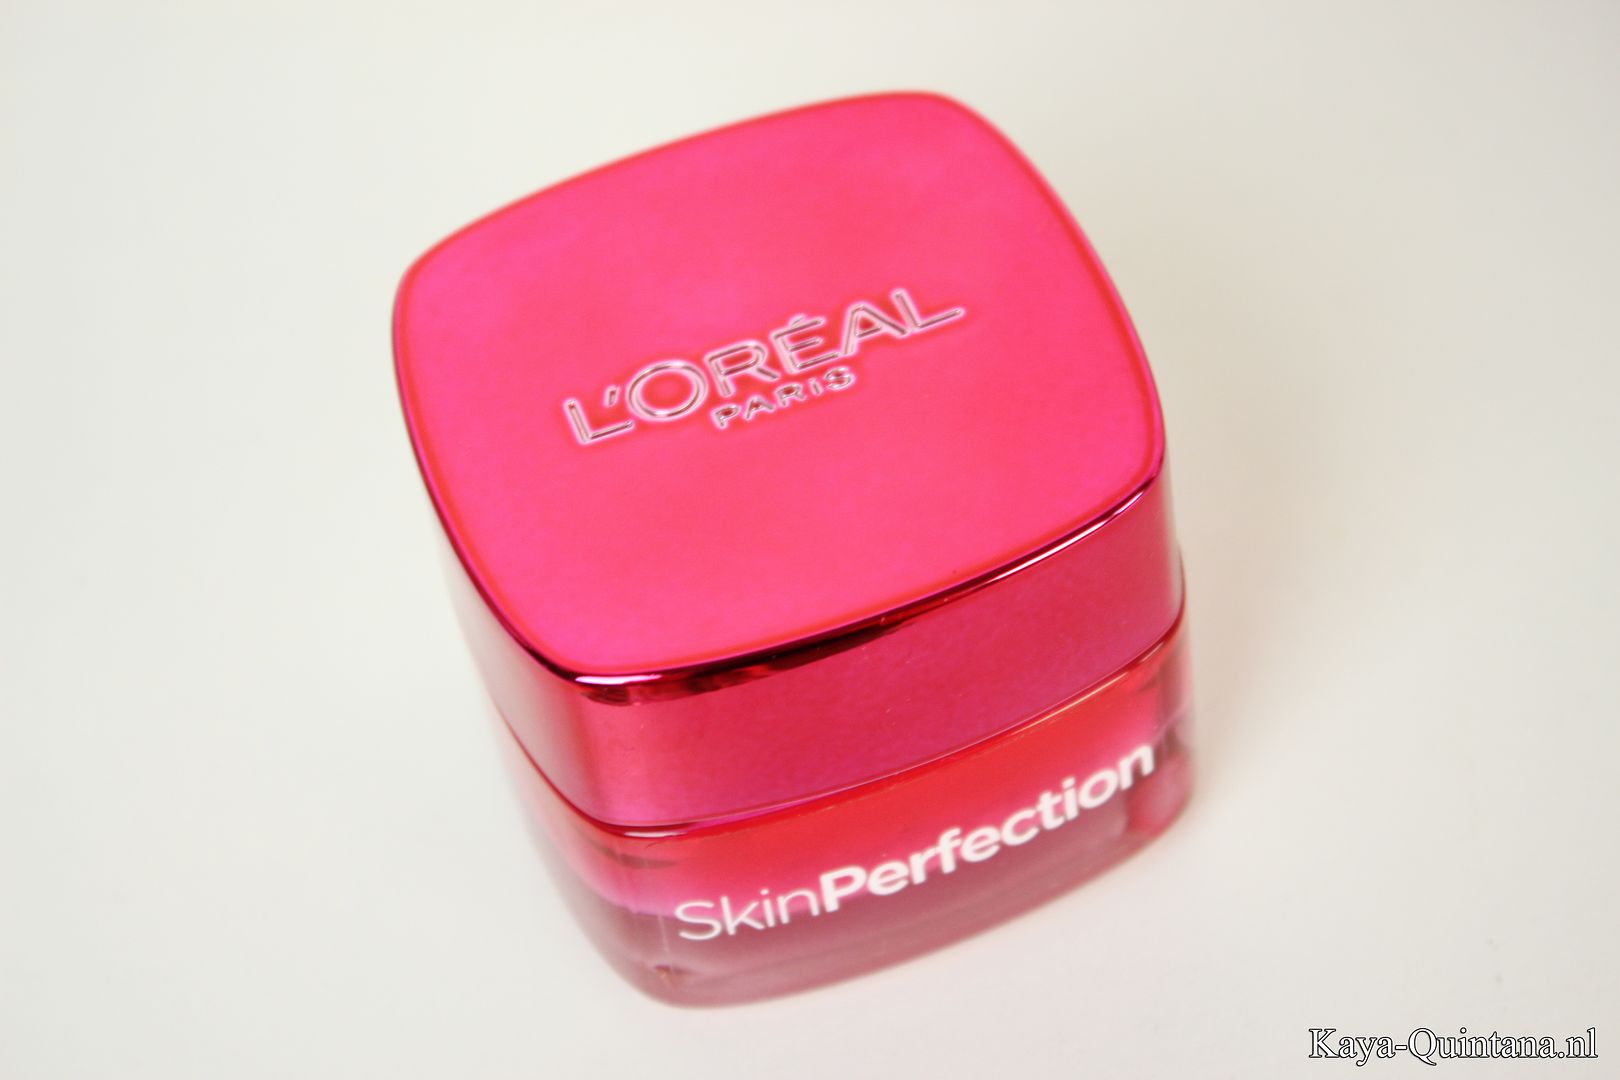 l'oreal skin perfection